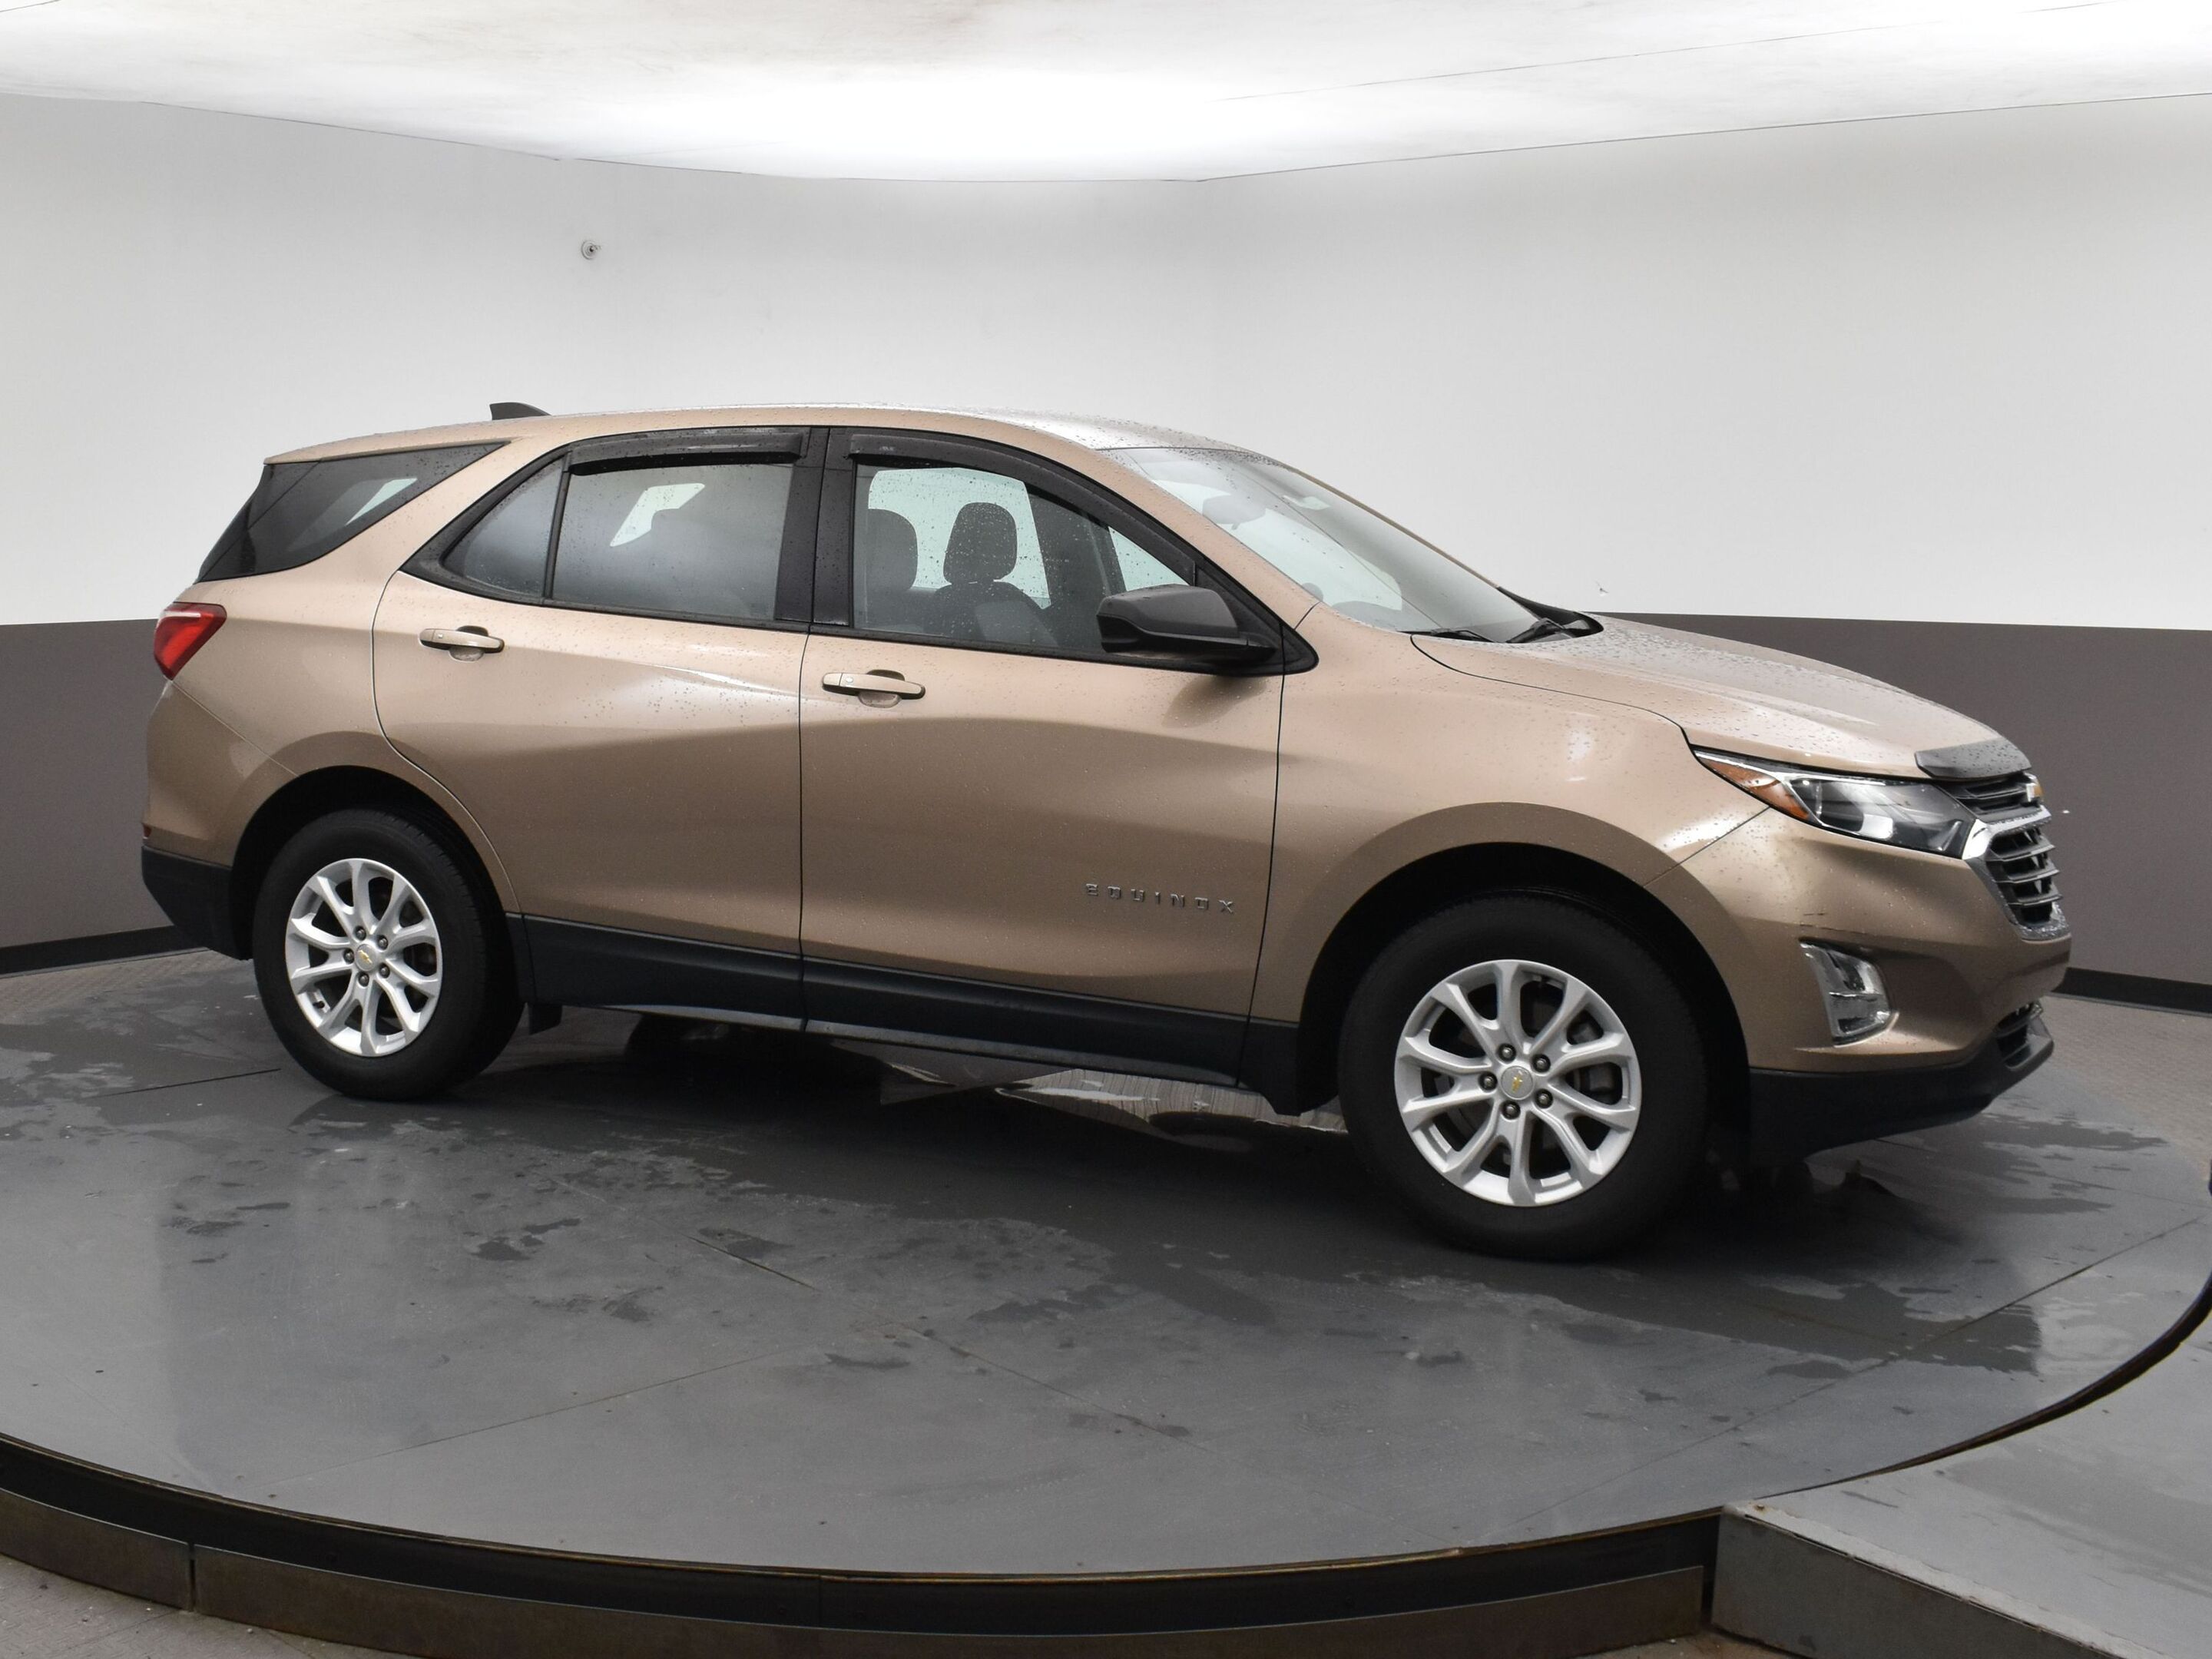 2019 Chevrolet Equinox LS AWD Low KM's with Alloy Wheels, Back Up Camera,